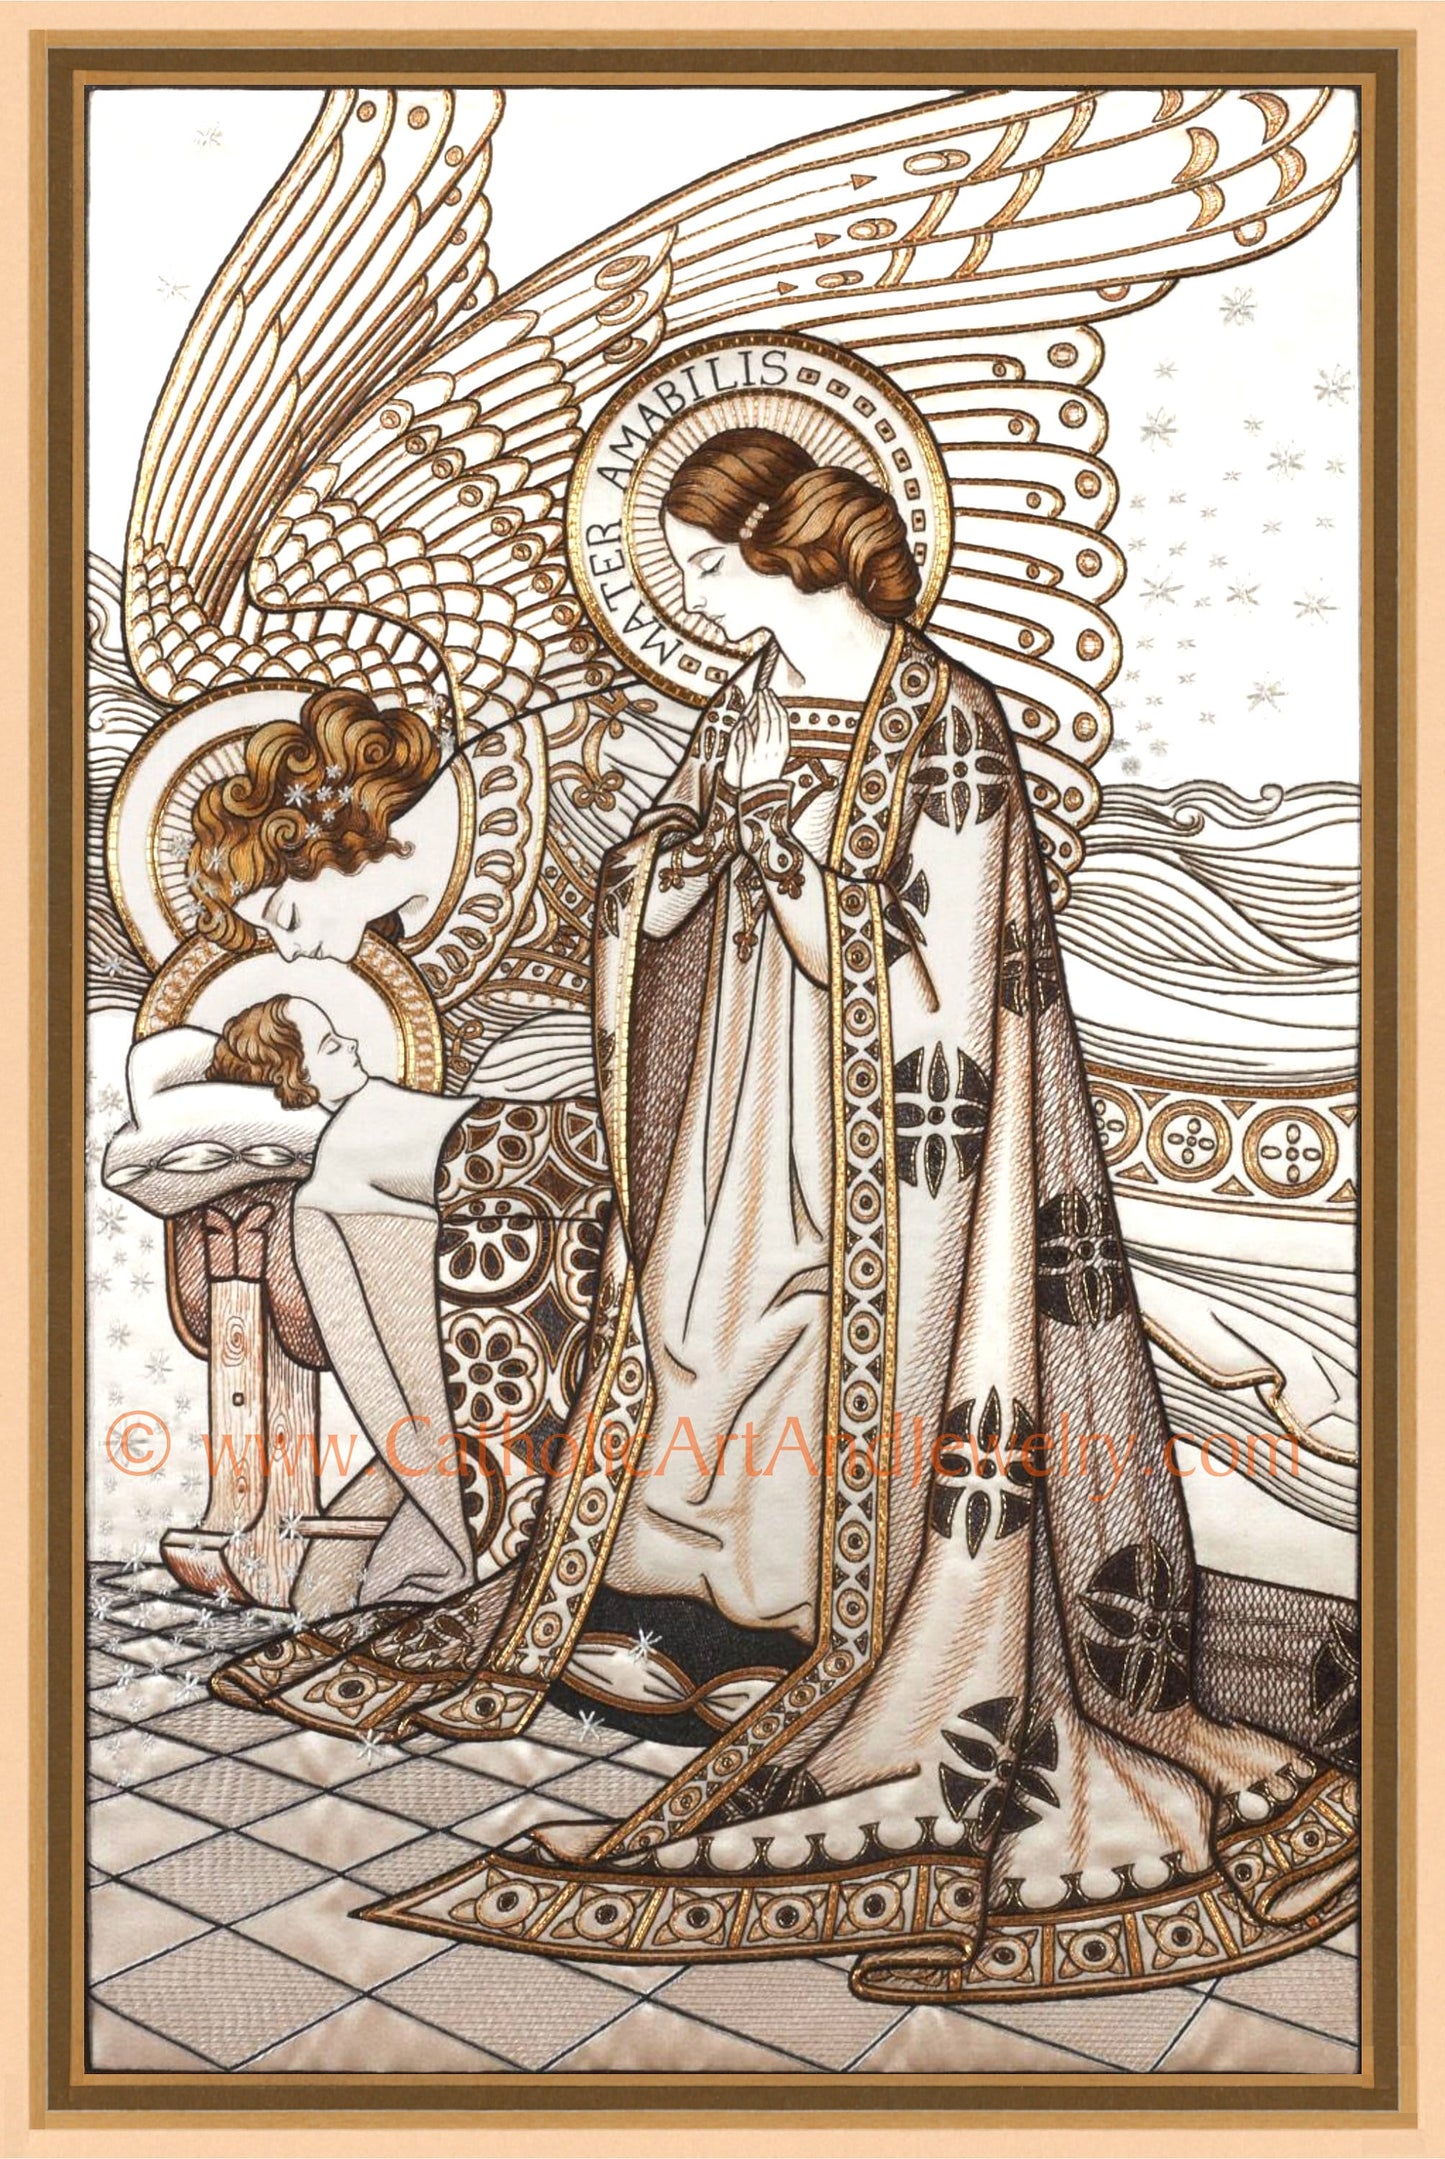 Loreto Embroideries – Lot of 8 or all 12 – Big Savings – Framed or Unframed – Vintage Catholic Art Prints – Archival Quality